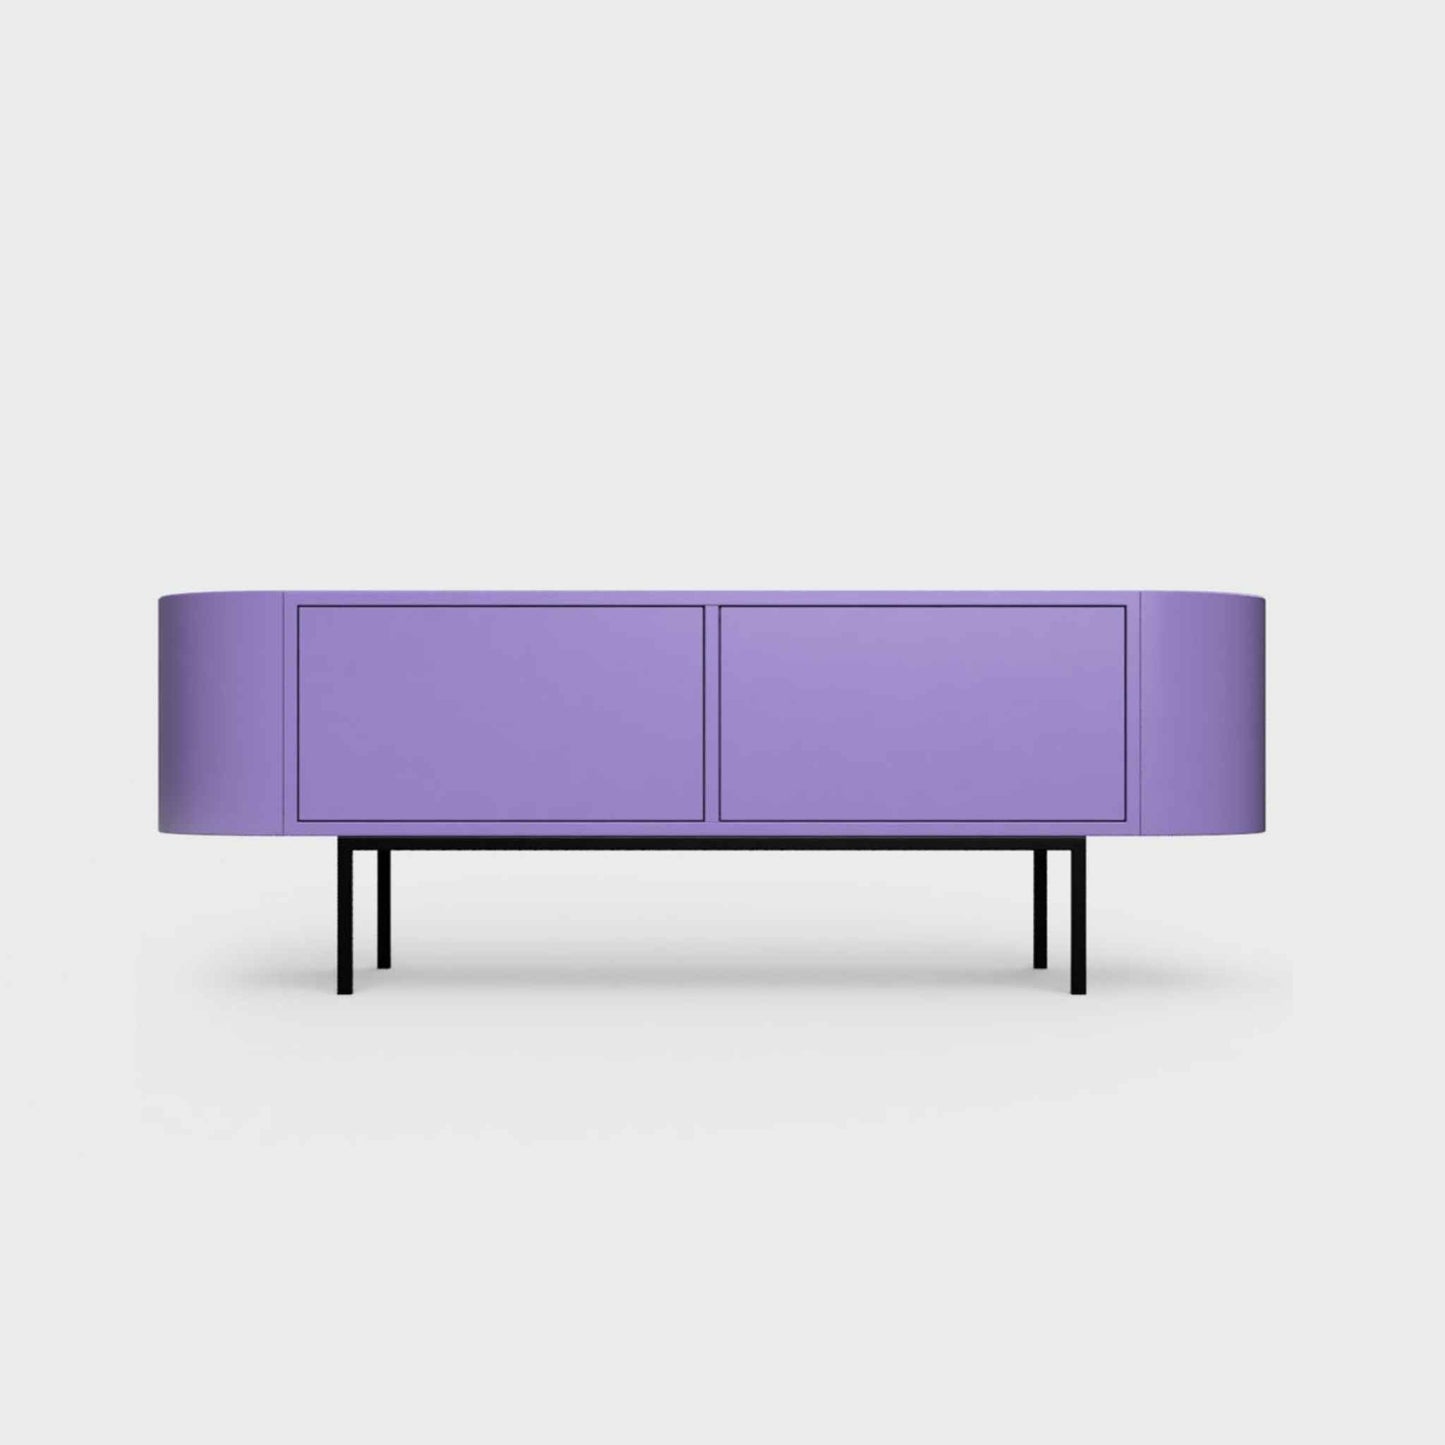 Curved Desiva Enna 01 lowboard in iris violet color steel, available in Switzerland via ÉTAUDORÉ